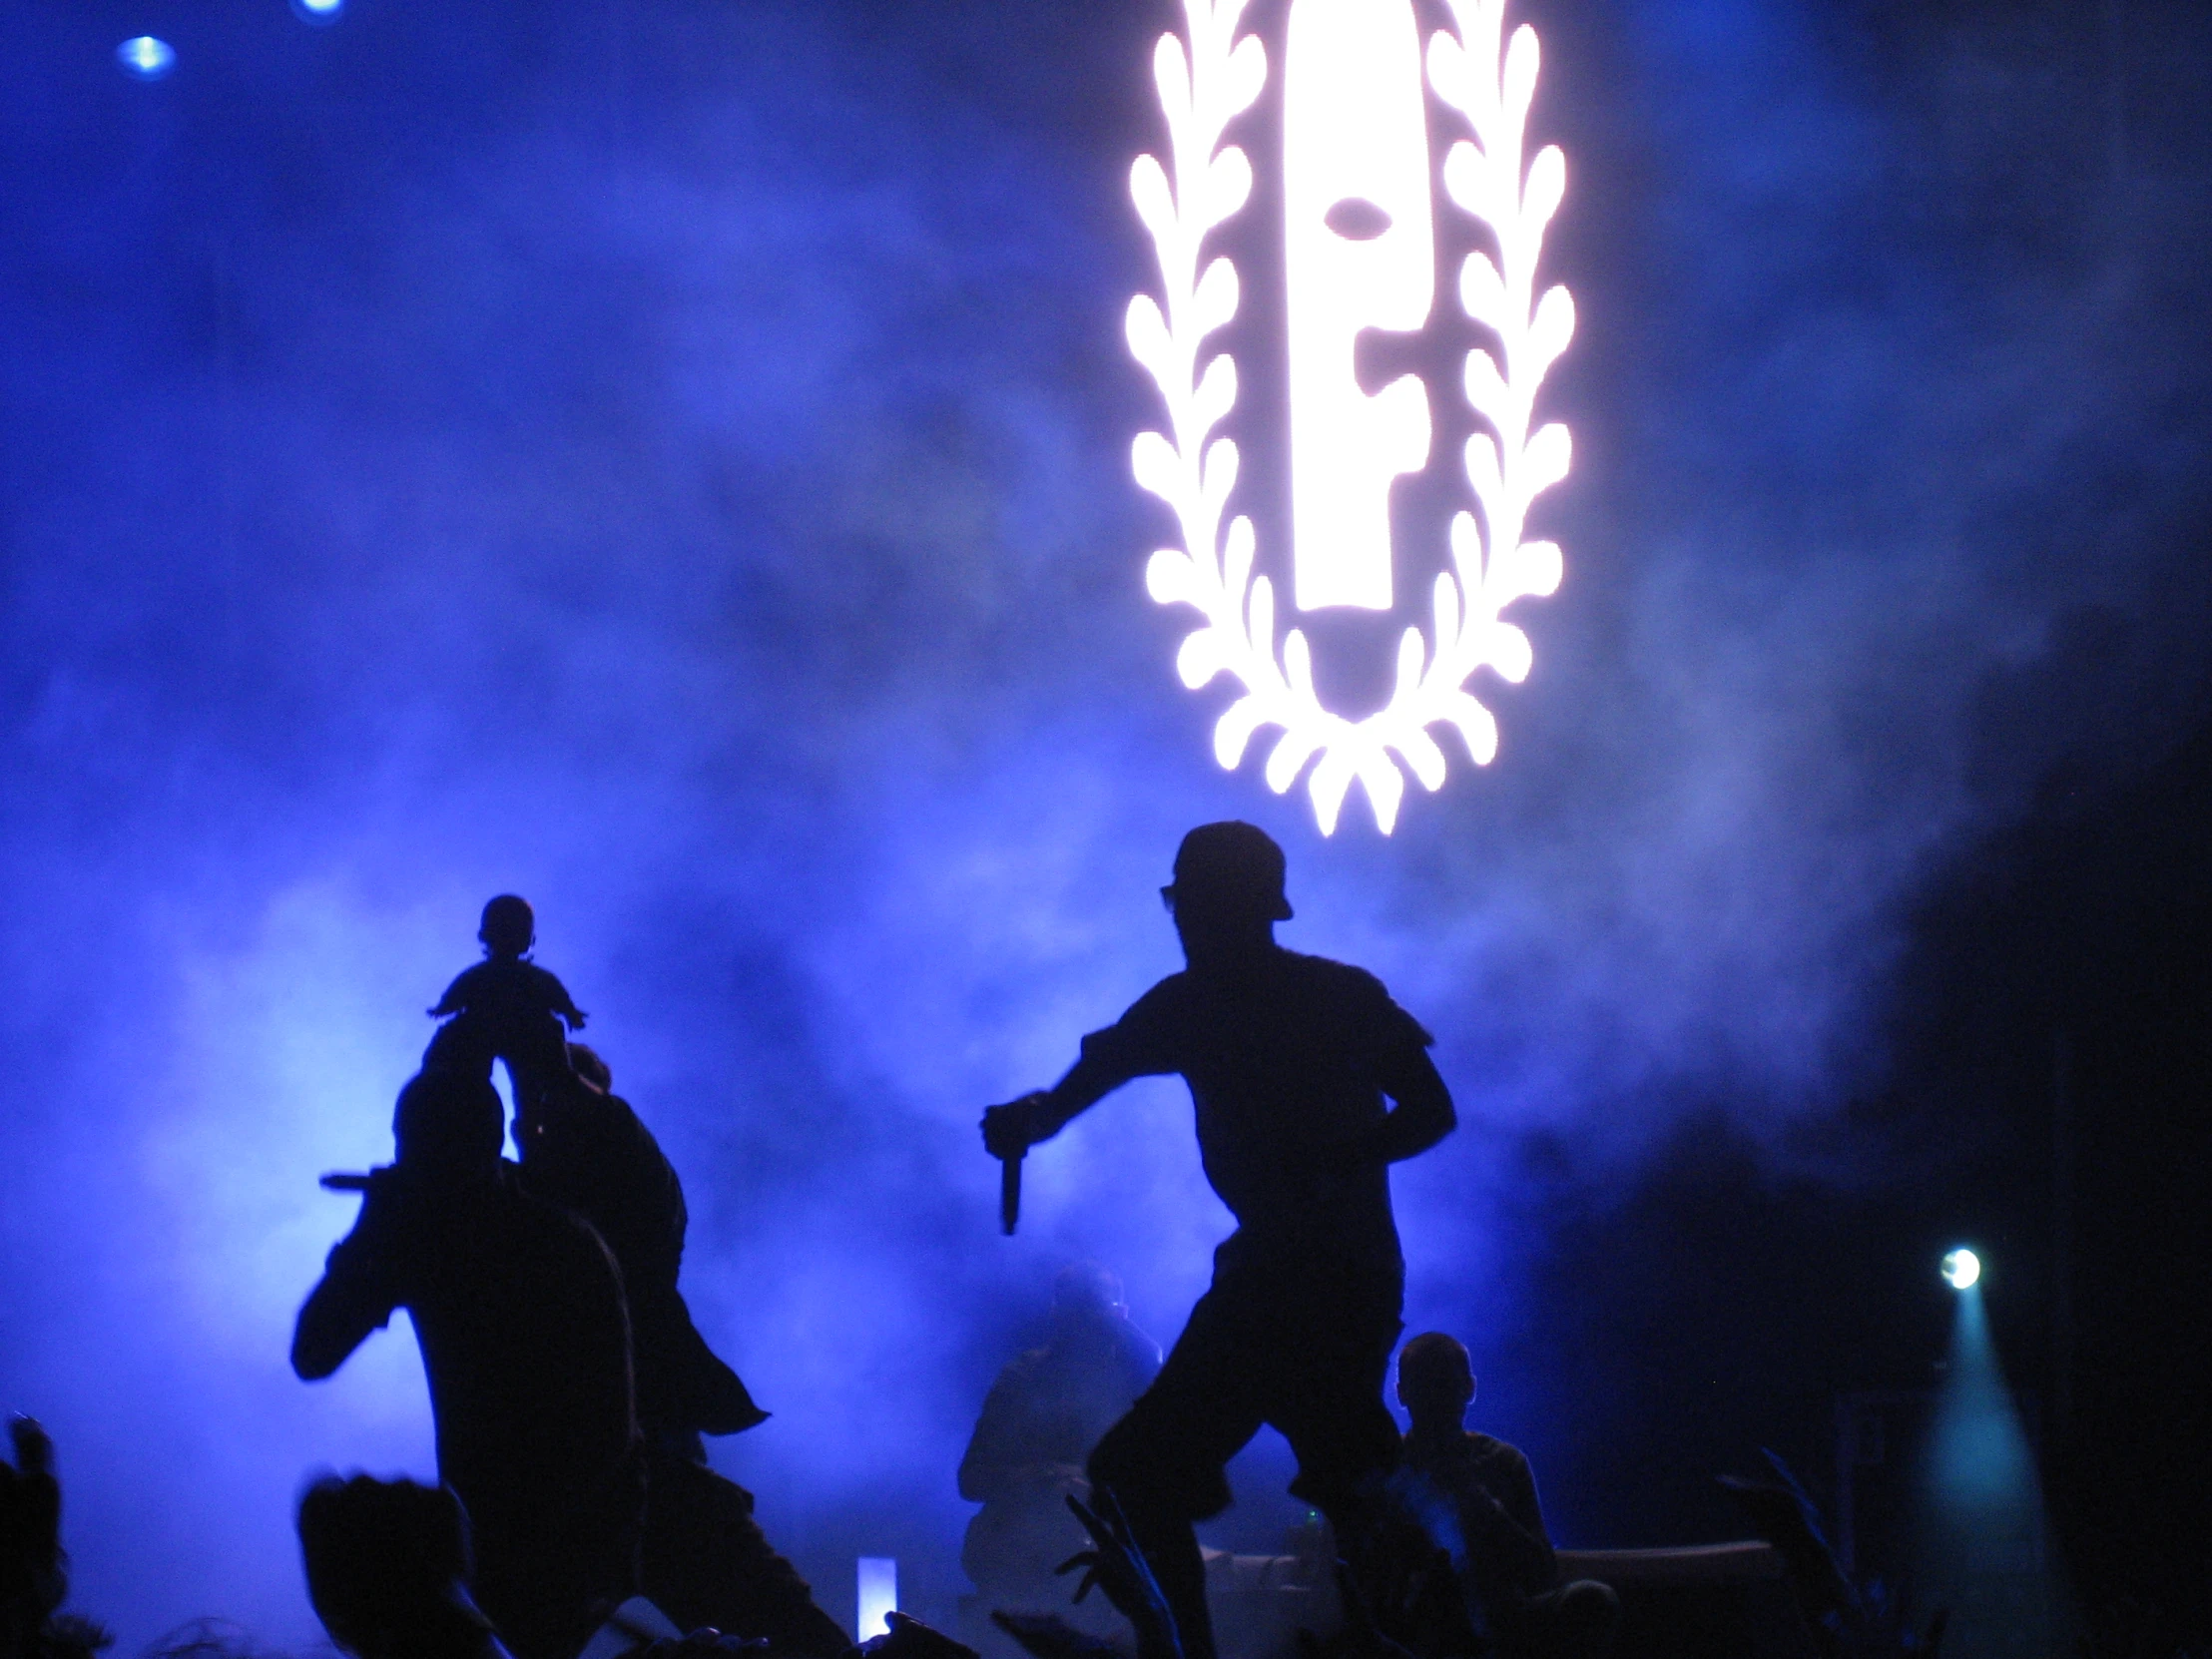 two silhouettes dancing on stage while an object appears in the background